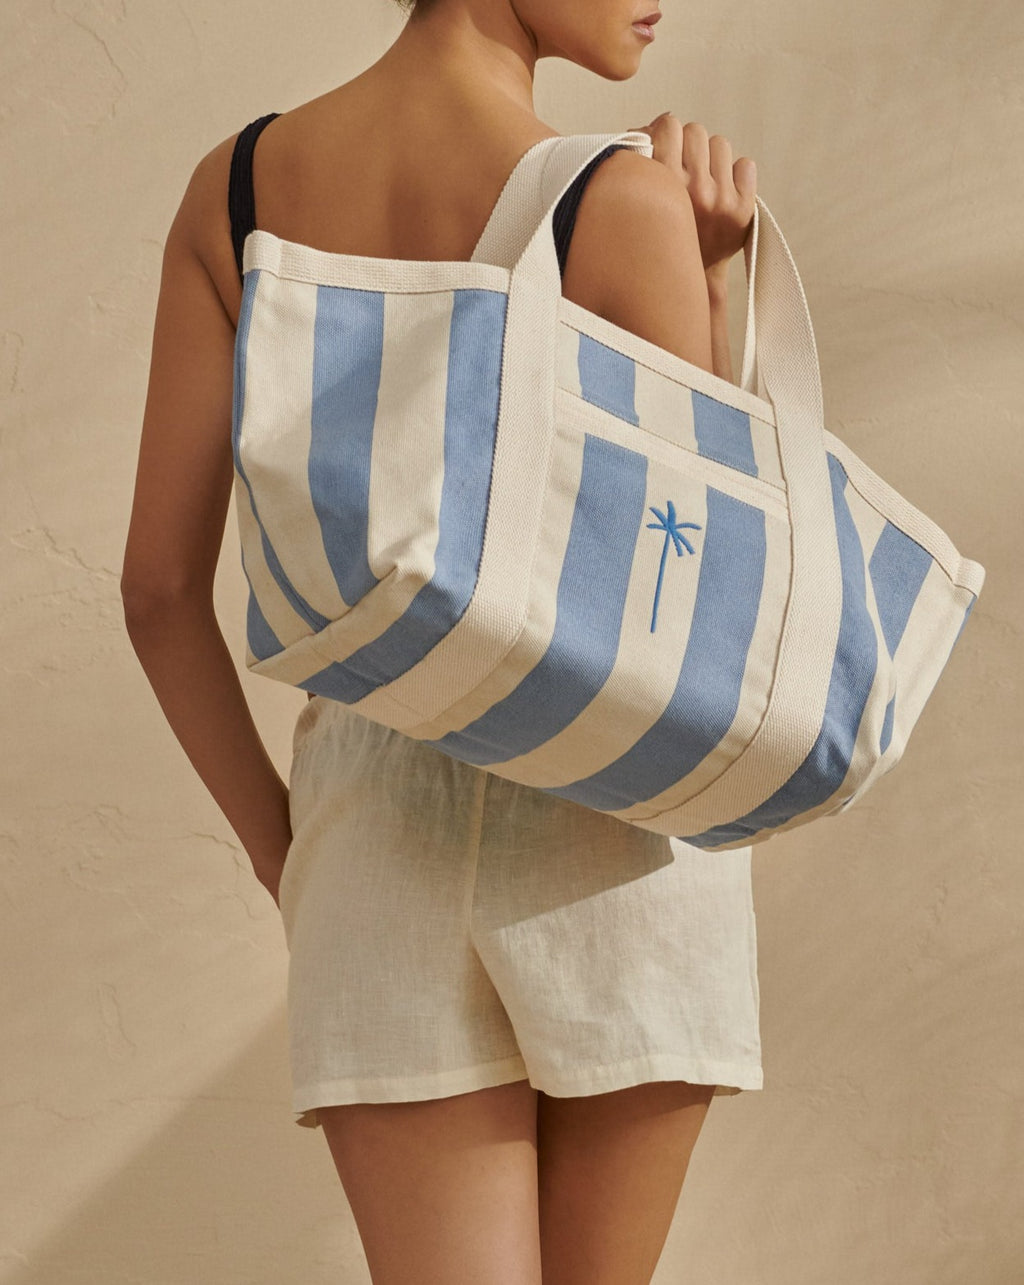 Fashionable Beachwear Must-Haves - The Striped Tote Bag in Pink